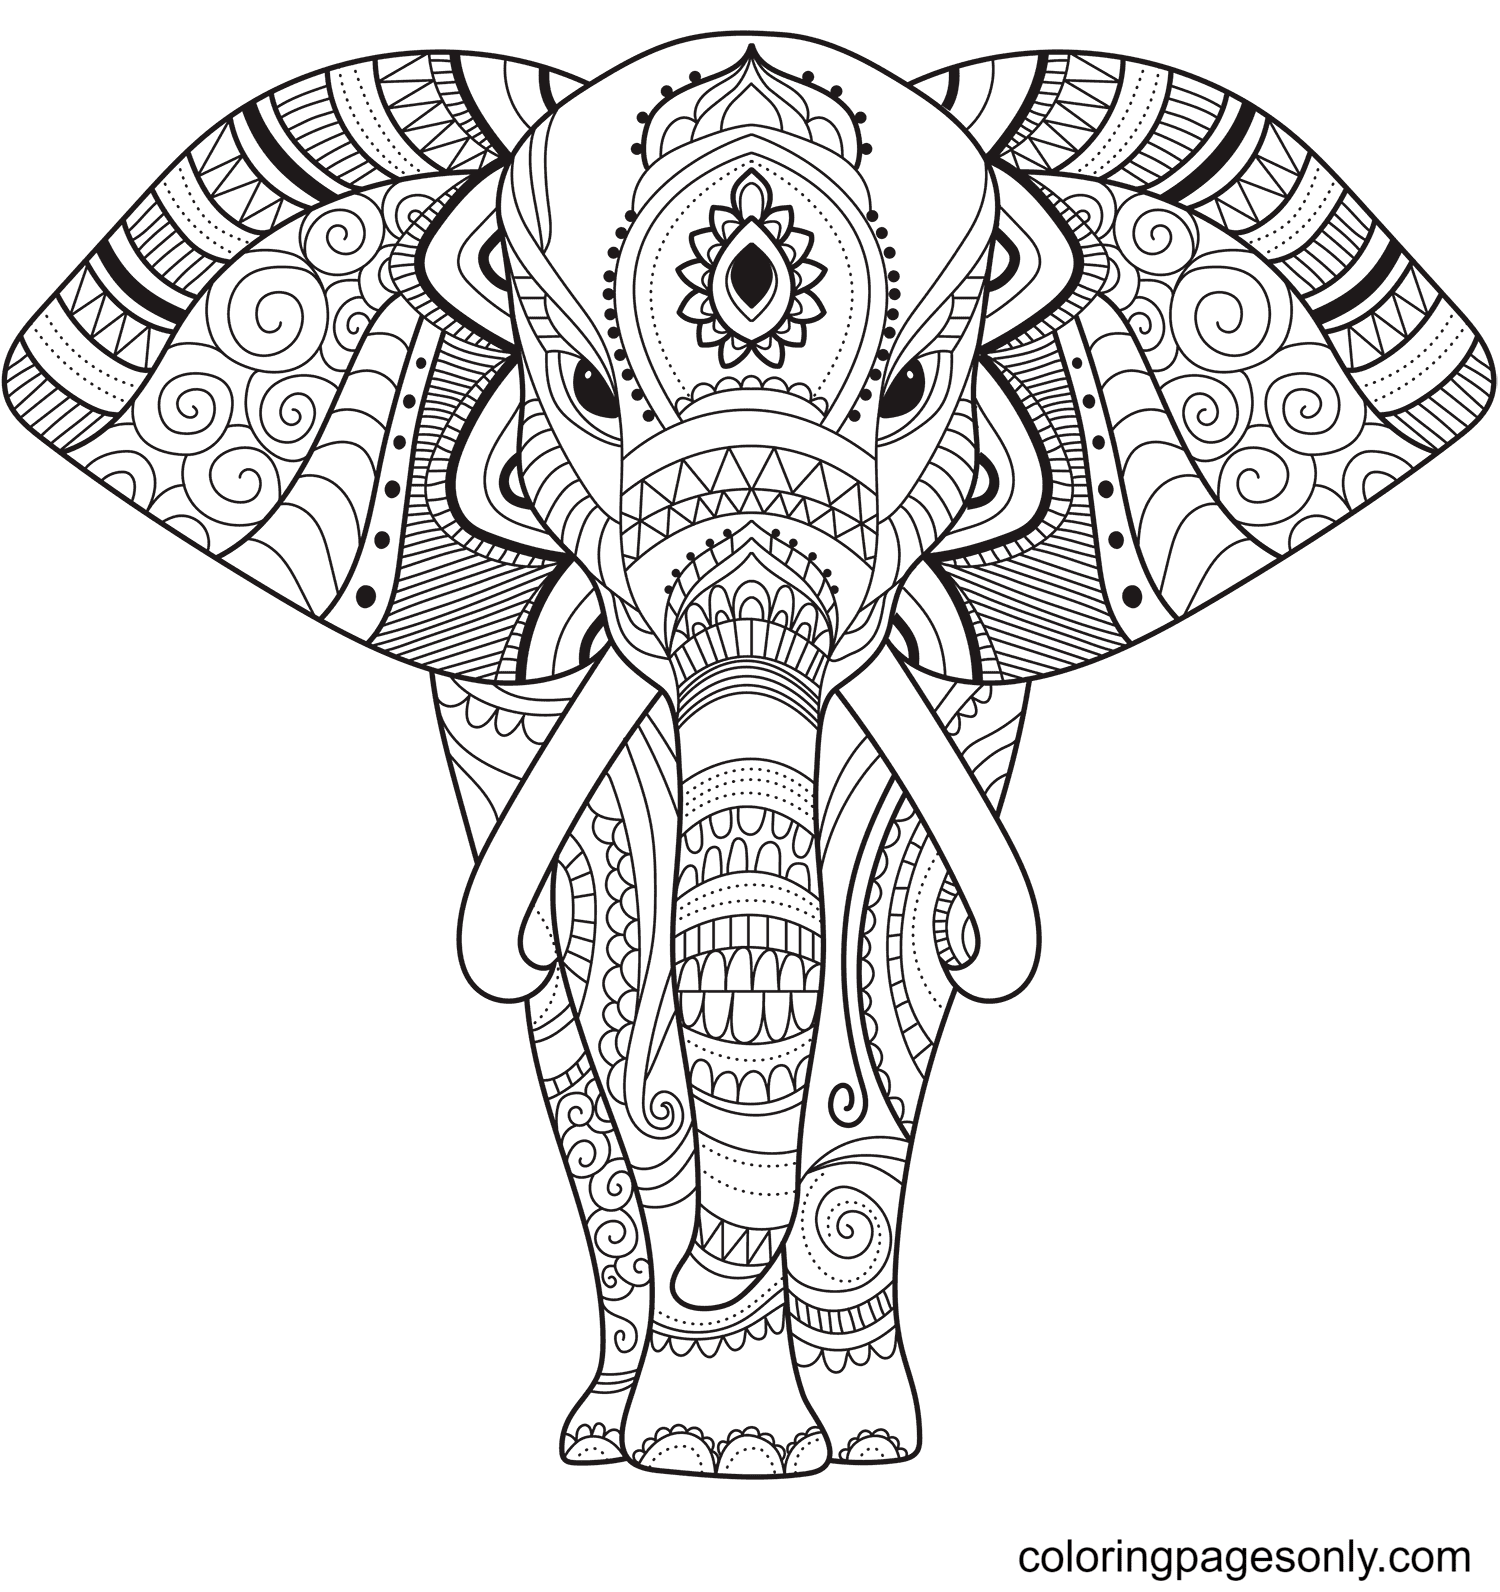 Zentangle Elephant Coloring Page